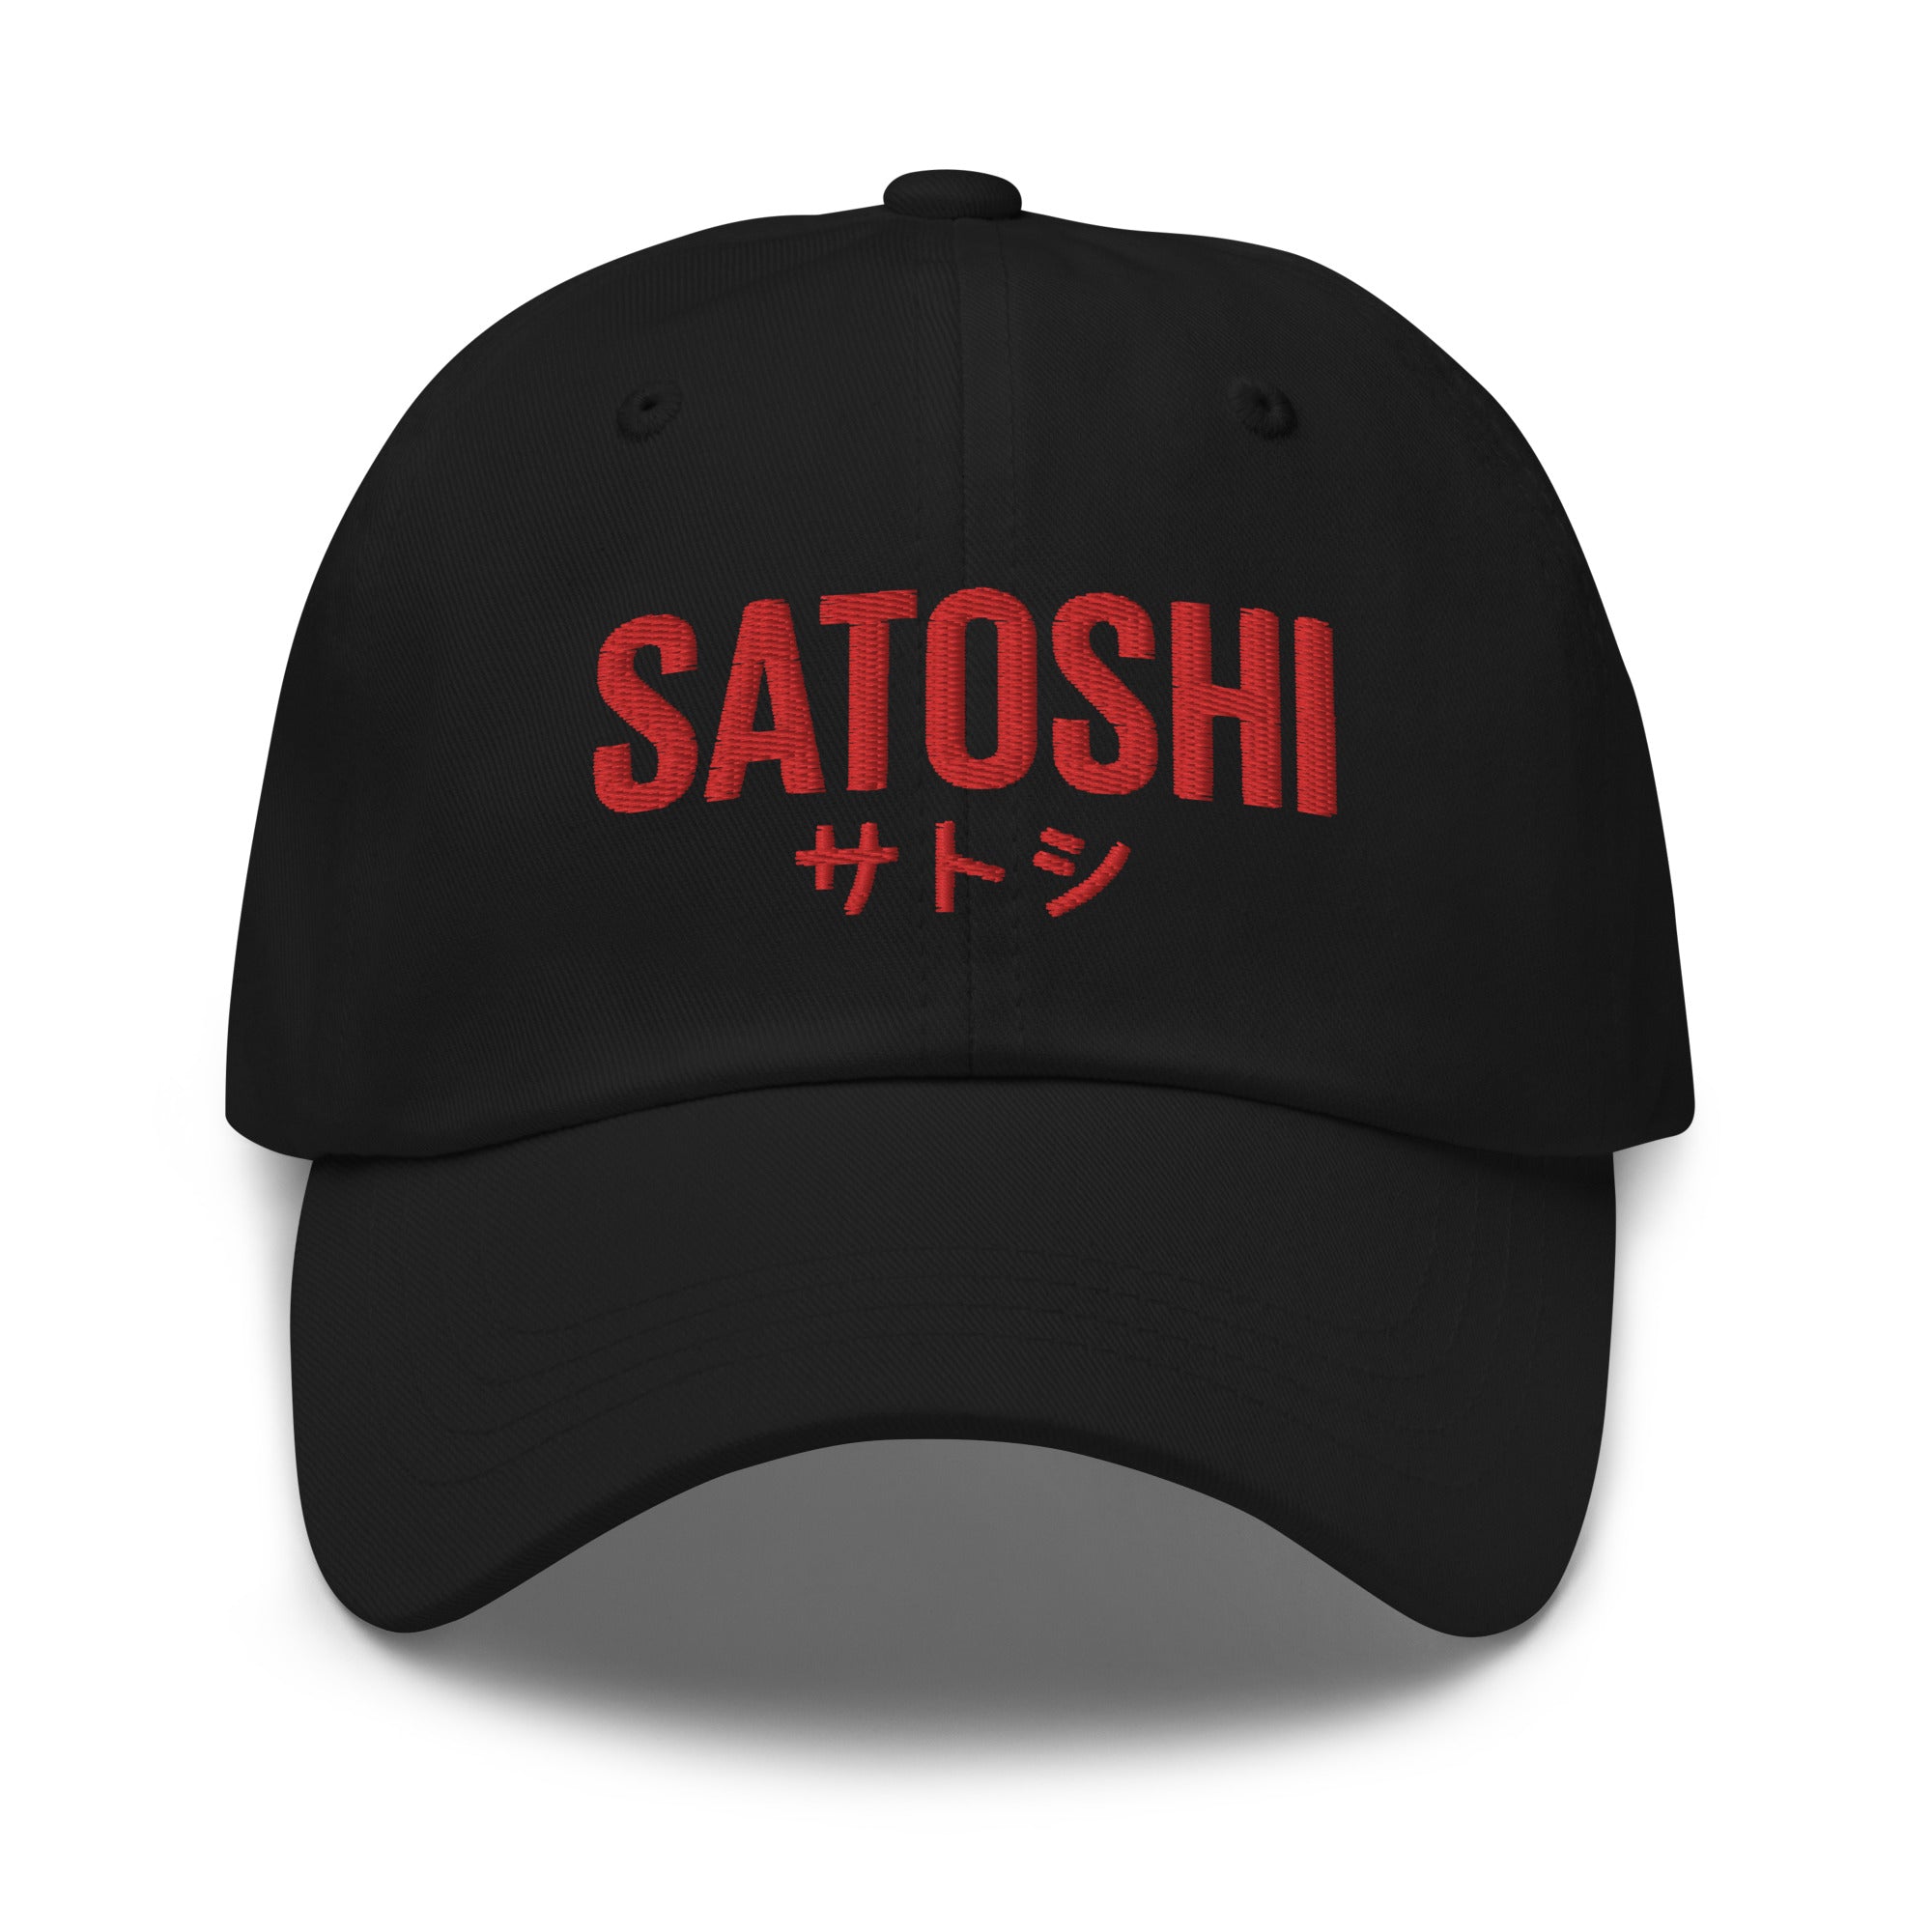 Bitcoin Hat - The Satoshi Hat (Red Logo) features embroidered designs on the front and back of a black cap. Front view.